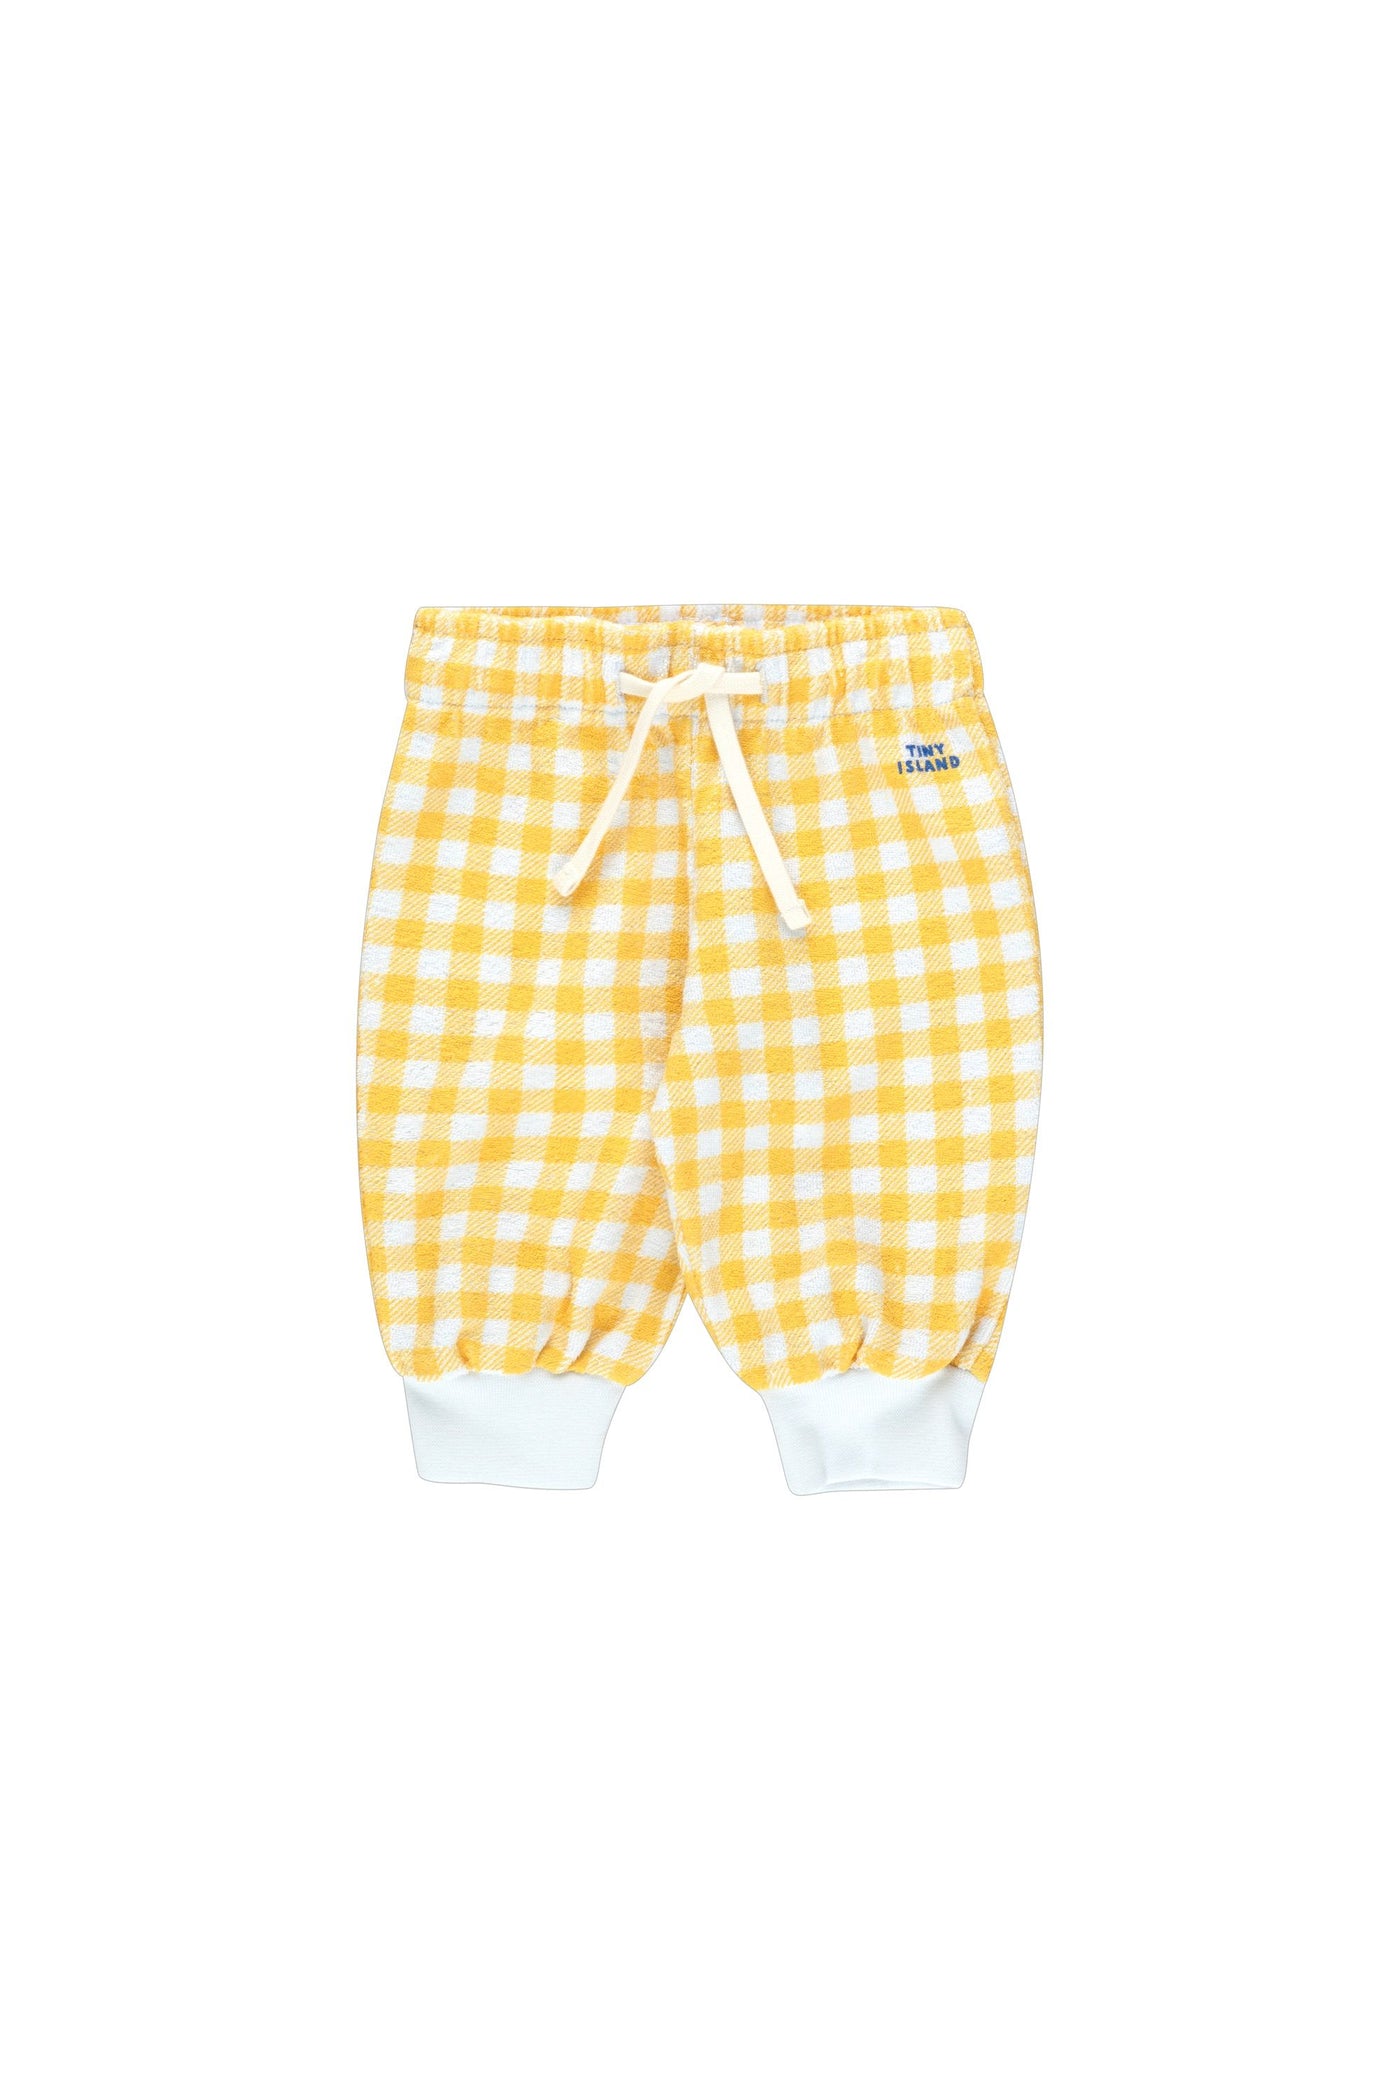 Vichy Baby Sweatpant in Pale Blue/Yellow